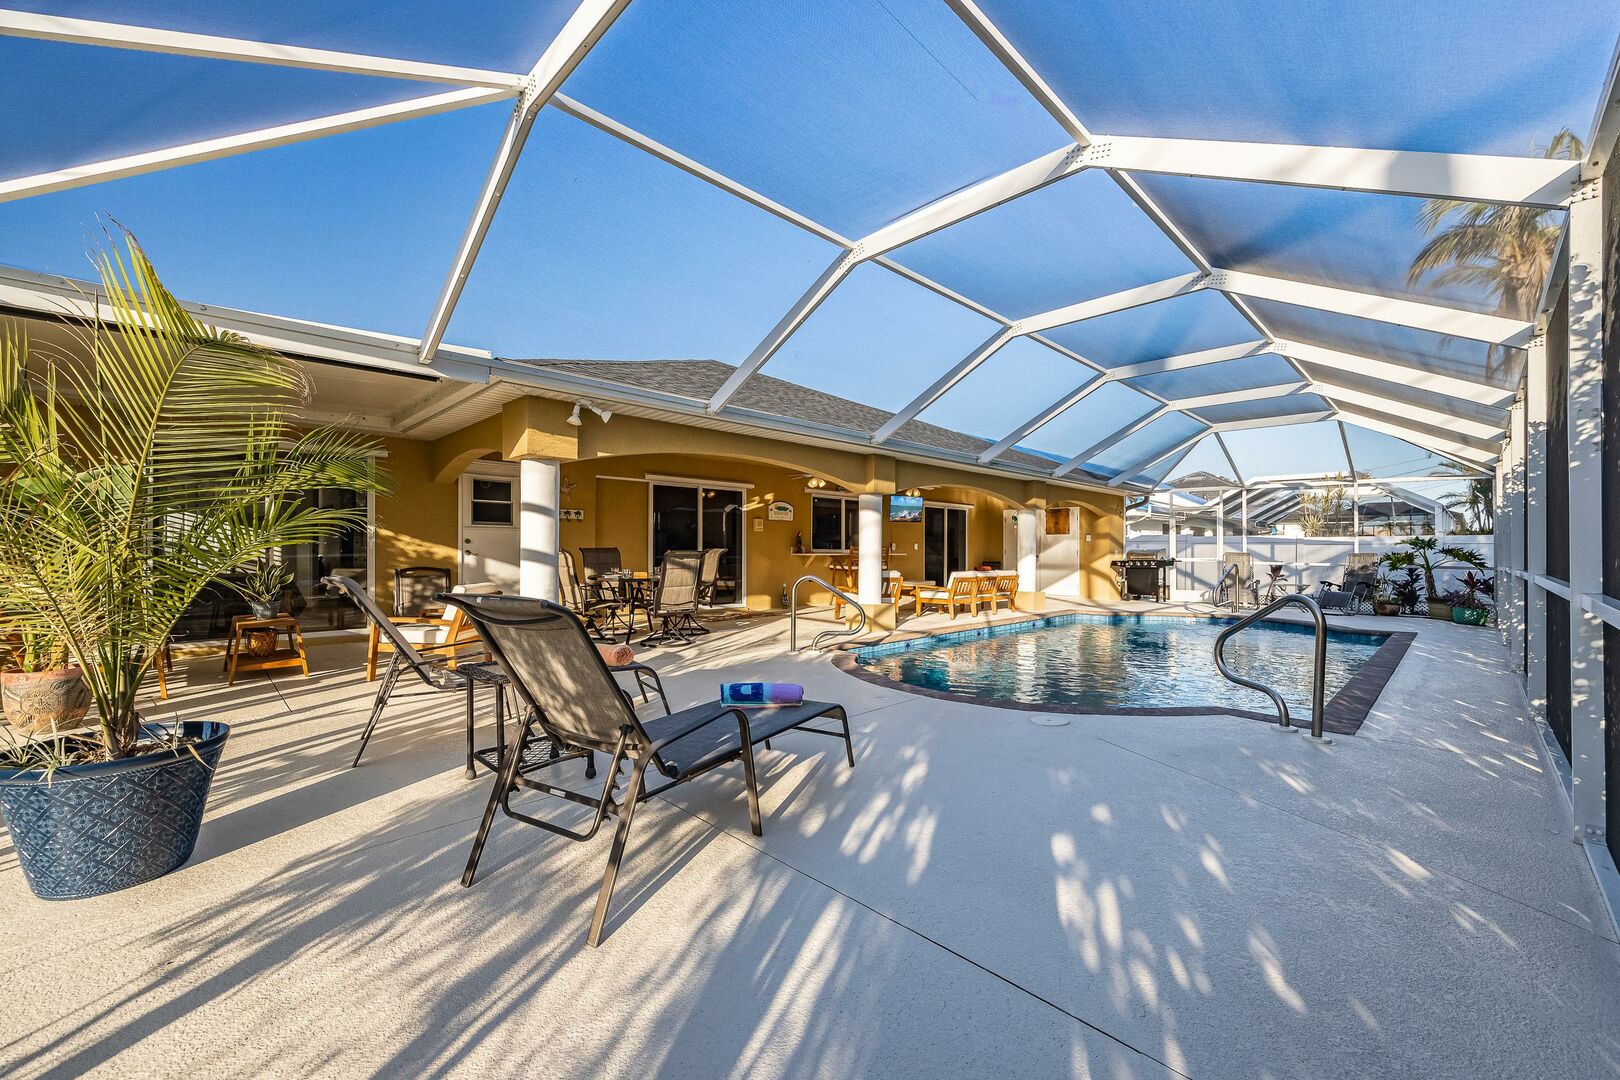 Cape Coral vacation home with heated pool